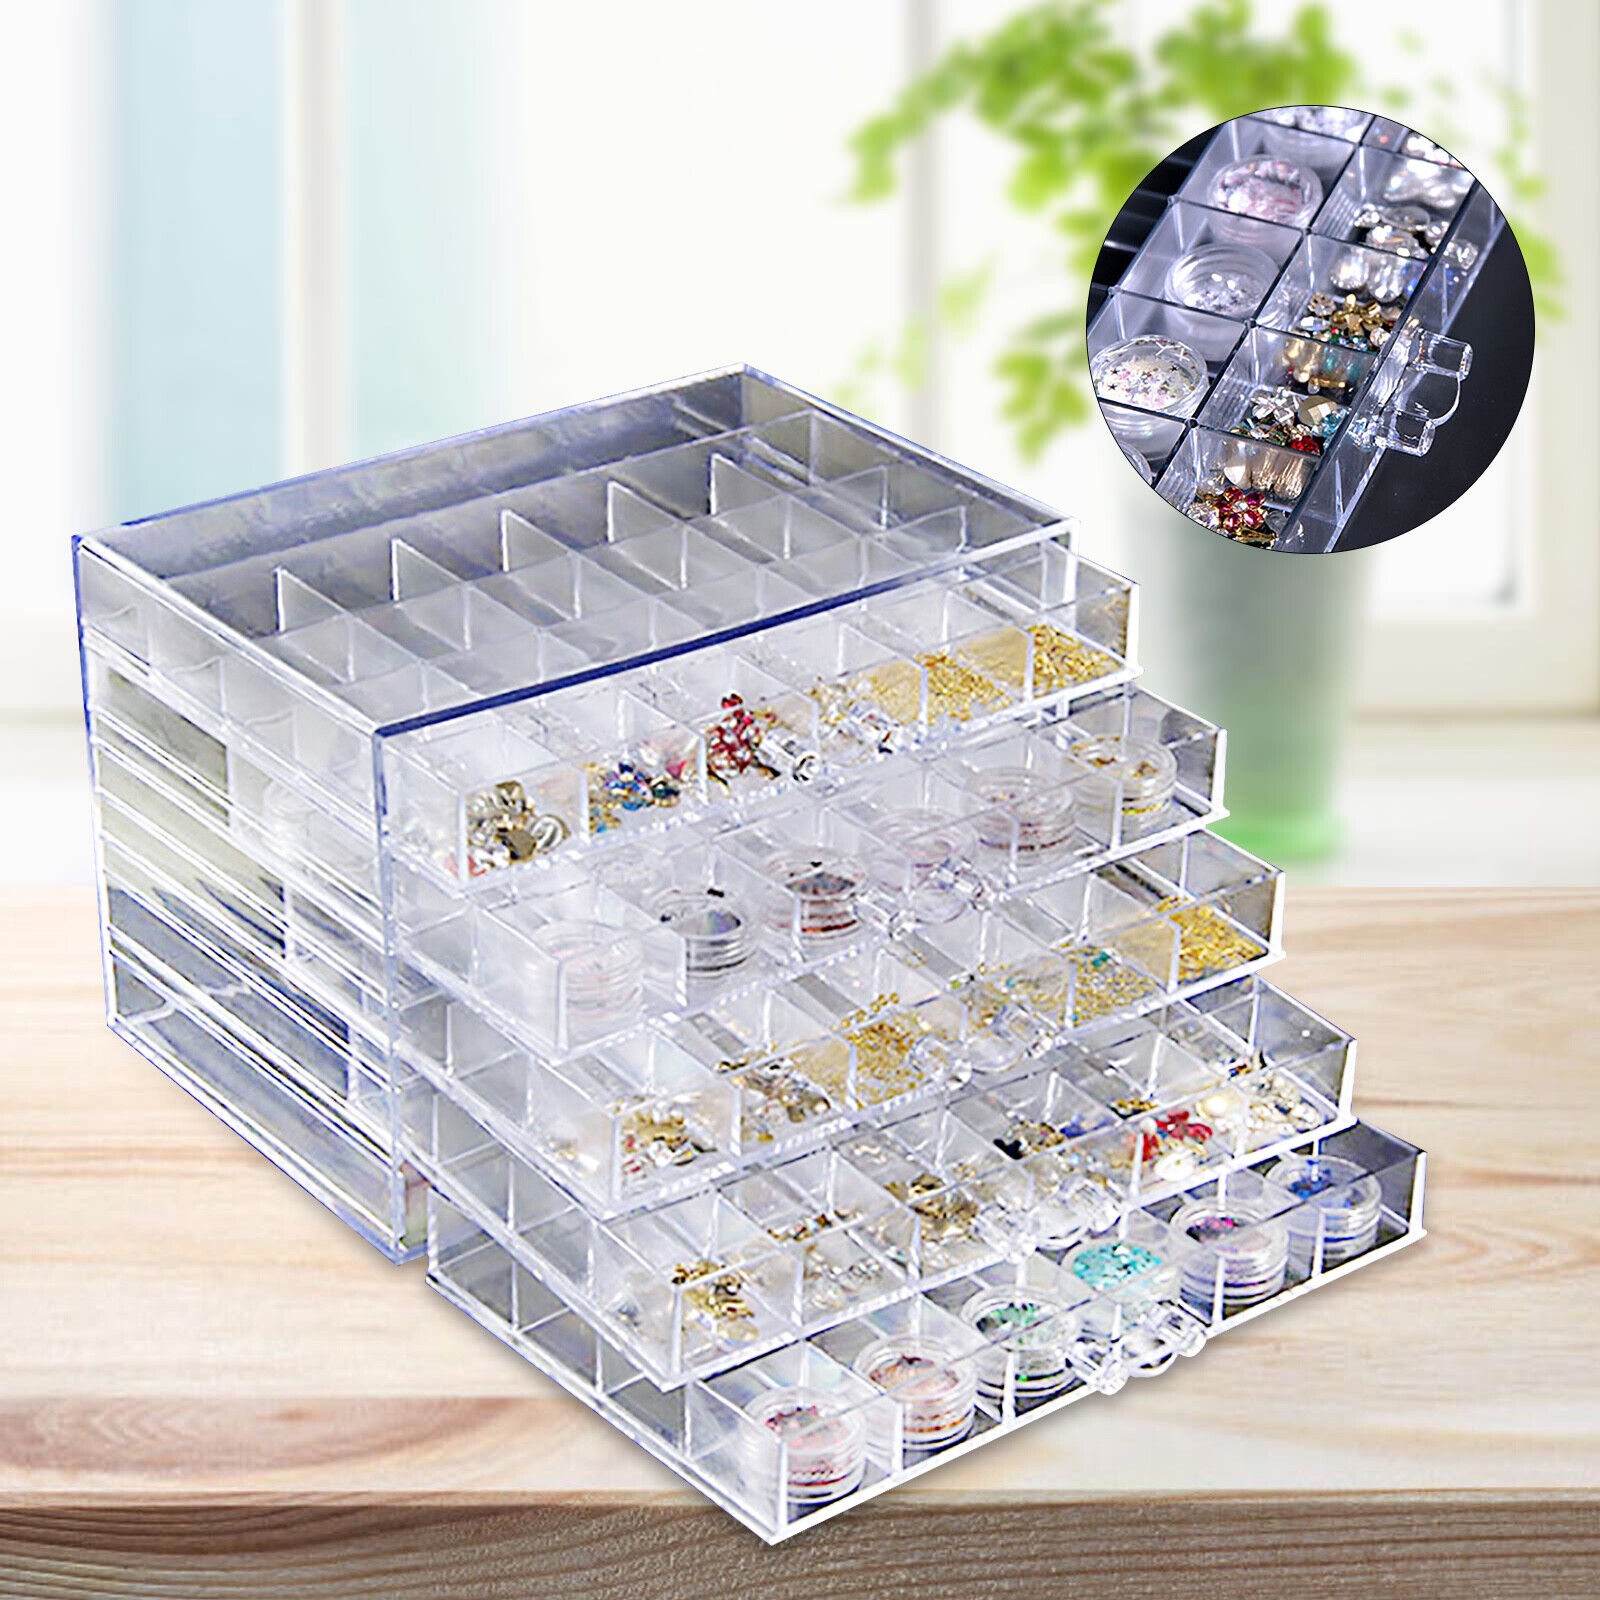 Collan 5 Layer Clear Jewelry Organizer Supplies Sequence Organizer - 5-layer